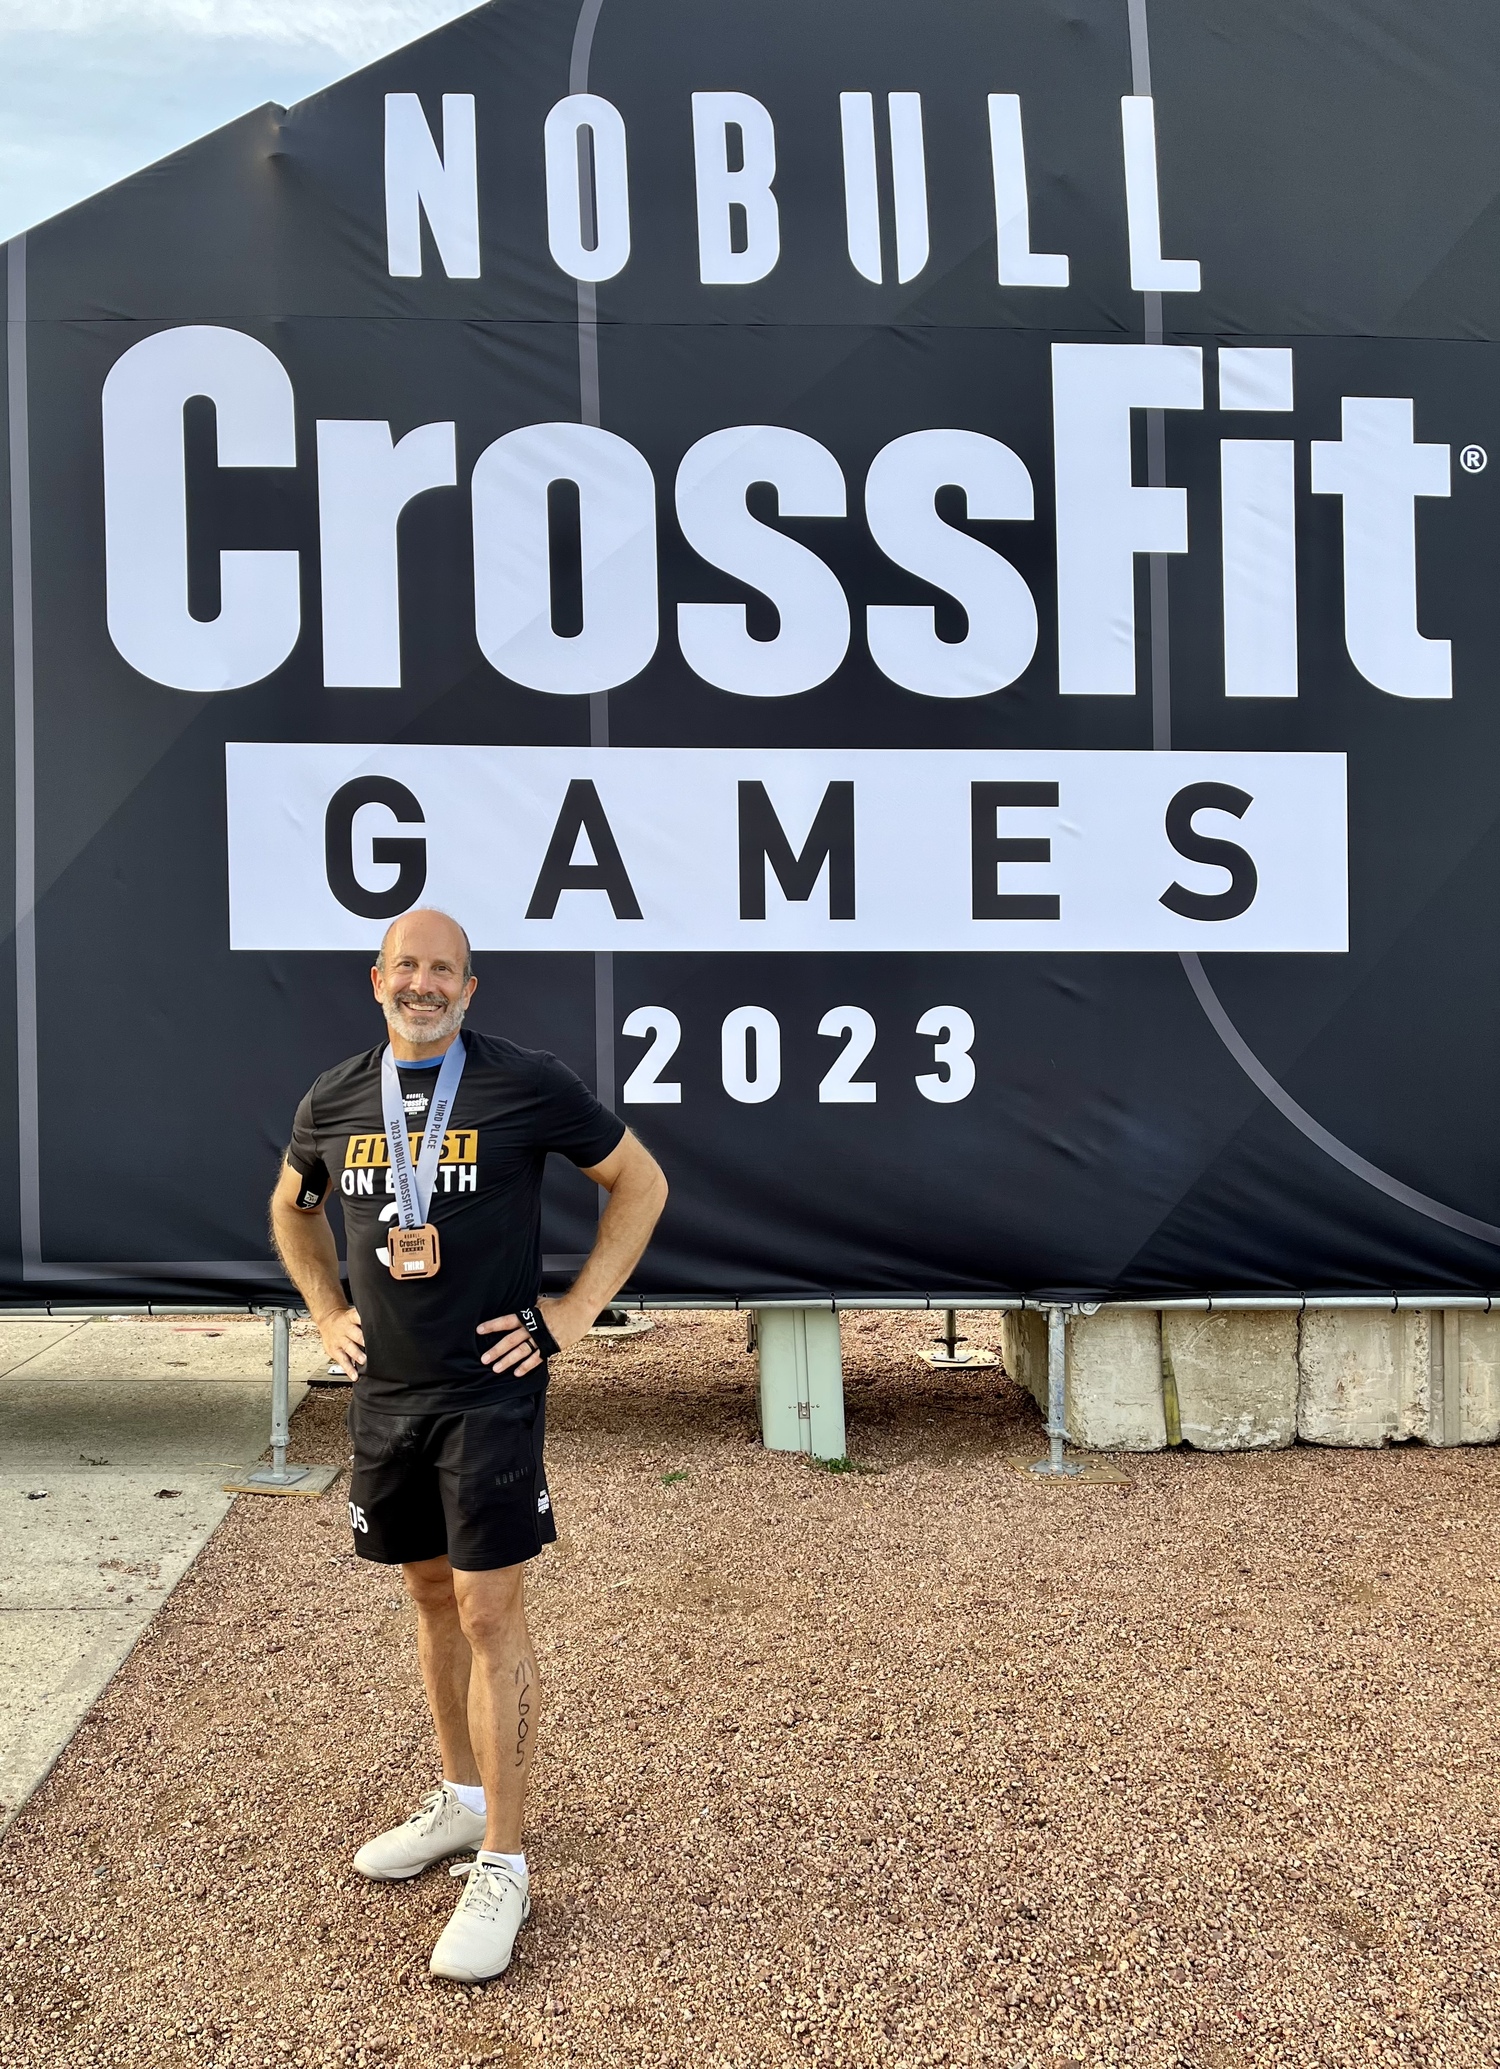 Eric Cohen returned home with a bronze medal from the 2023 NoBull Crossfit Games.